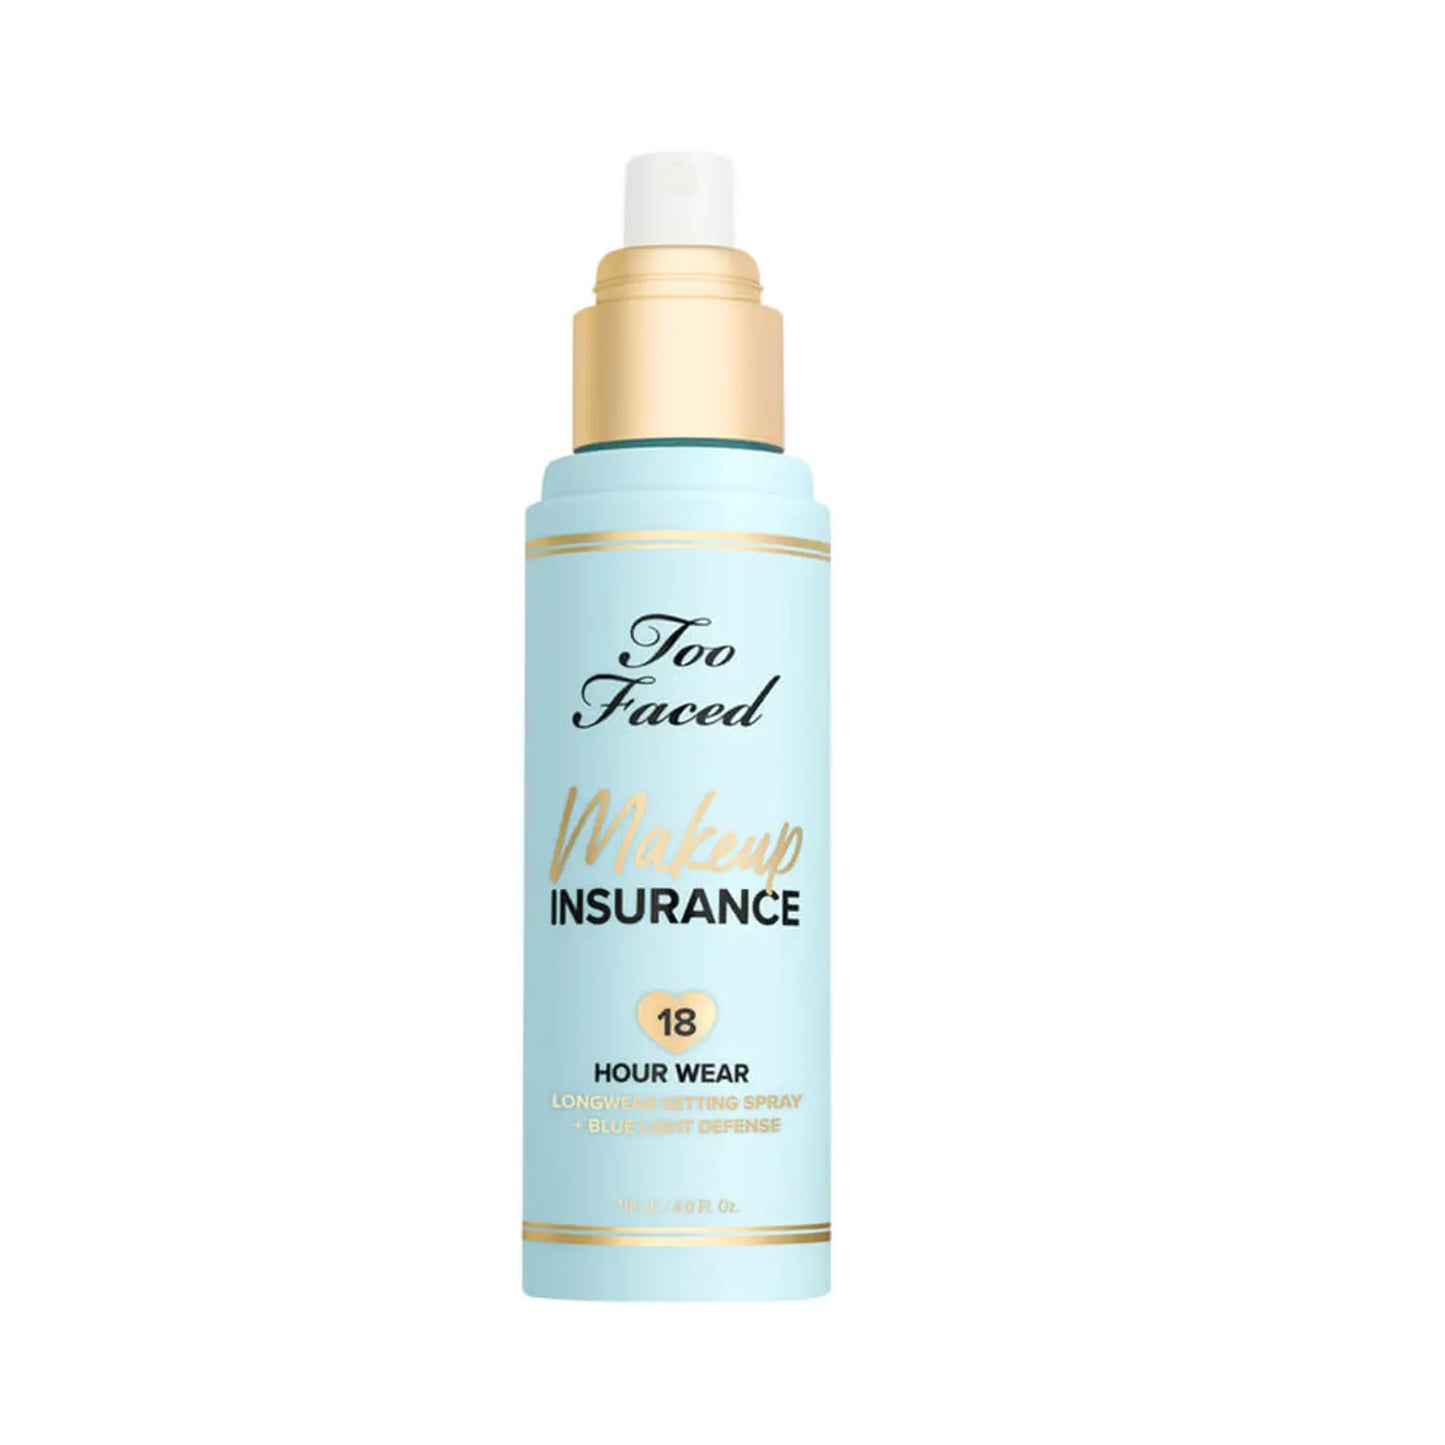 Too Faced Makeup Insurance Long wear Setting Spray